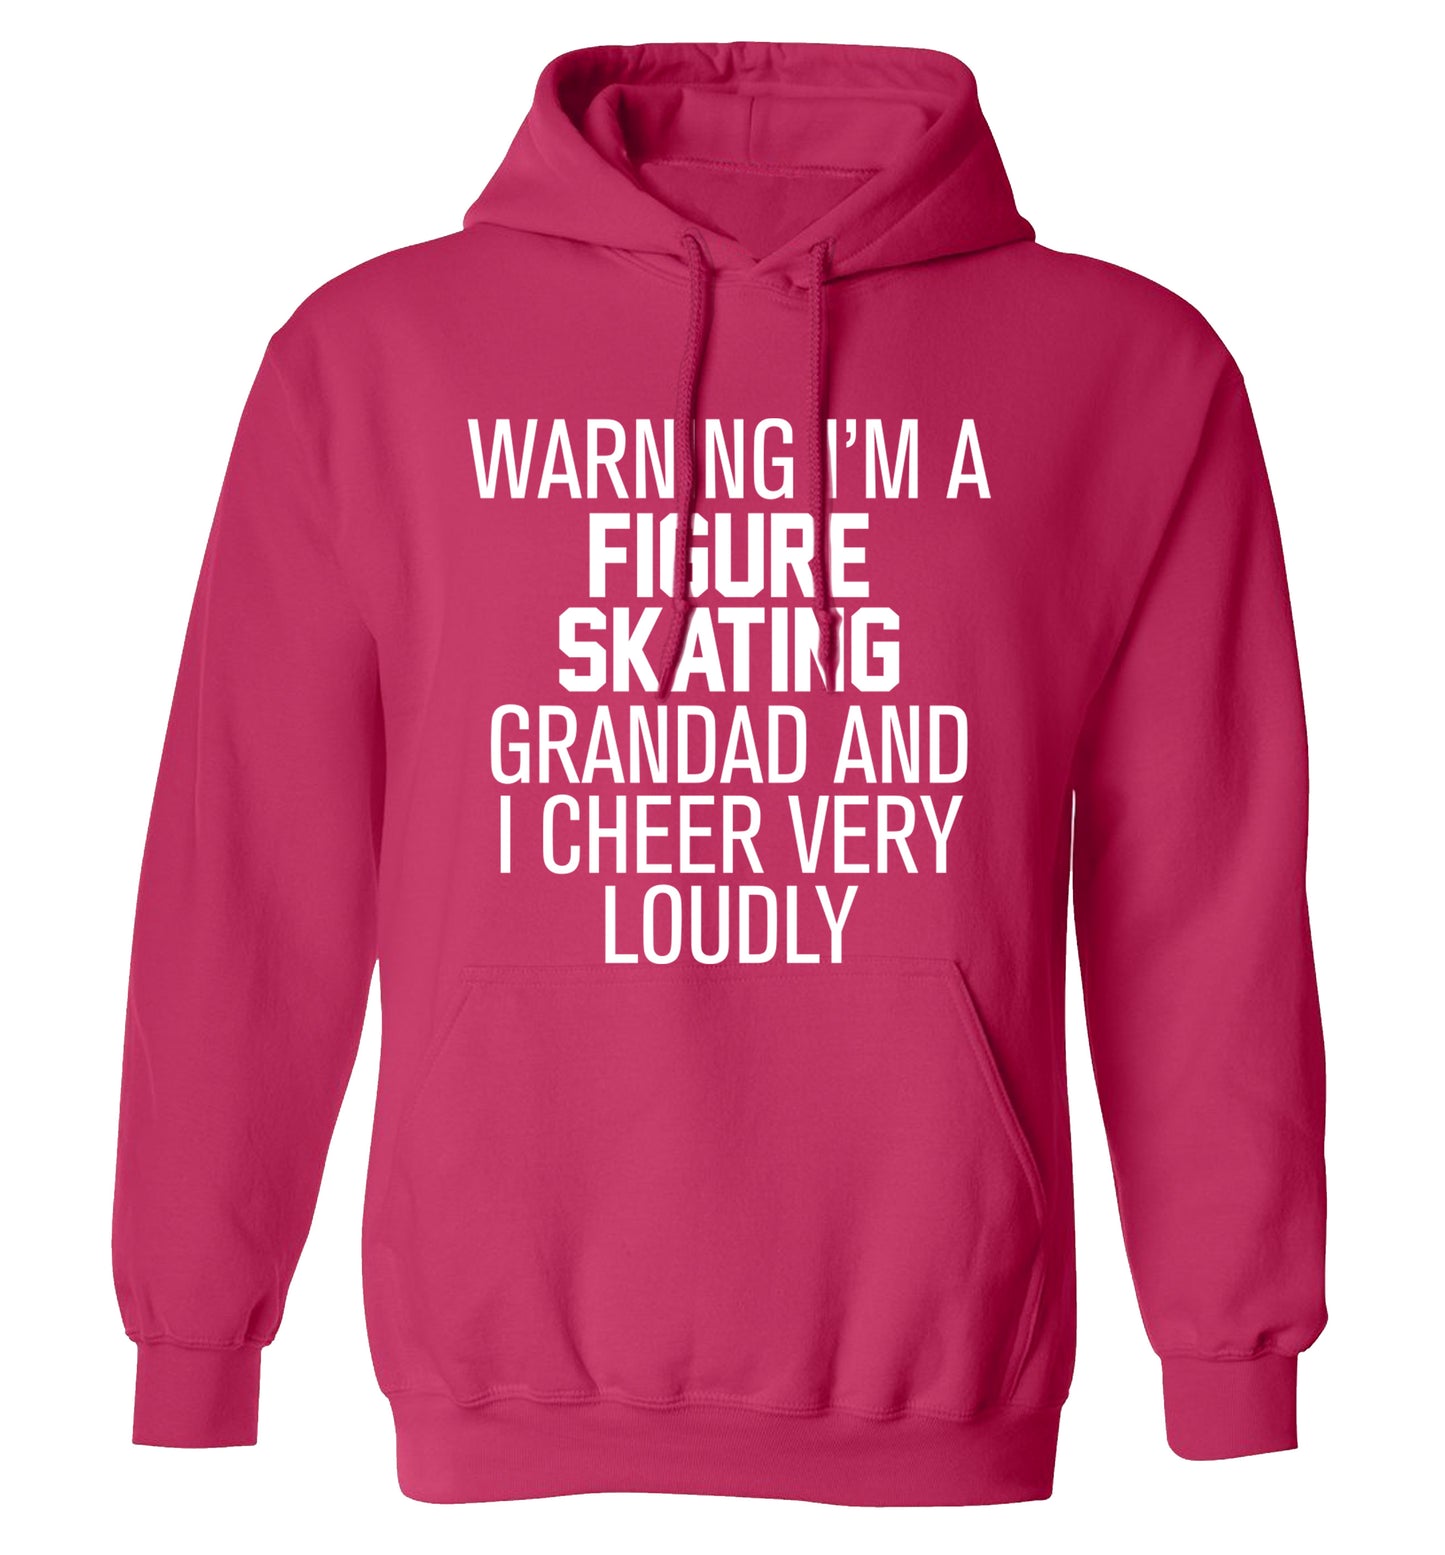 Warning I'm a figure skating grandad and I cheer very loudly adults unisexpink hoodie 2XL